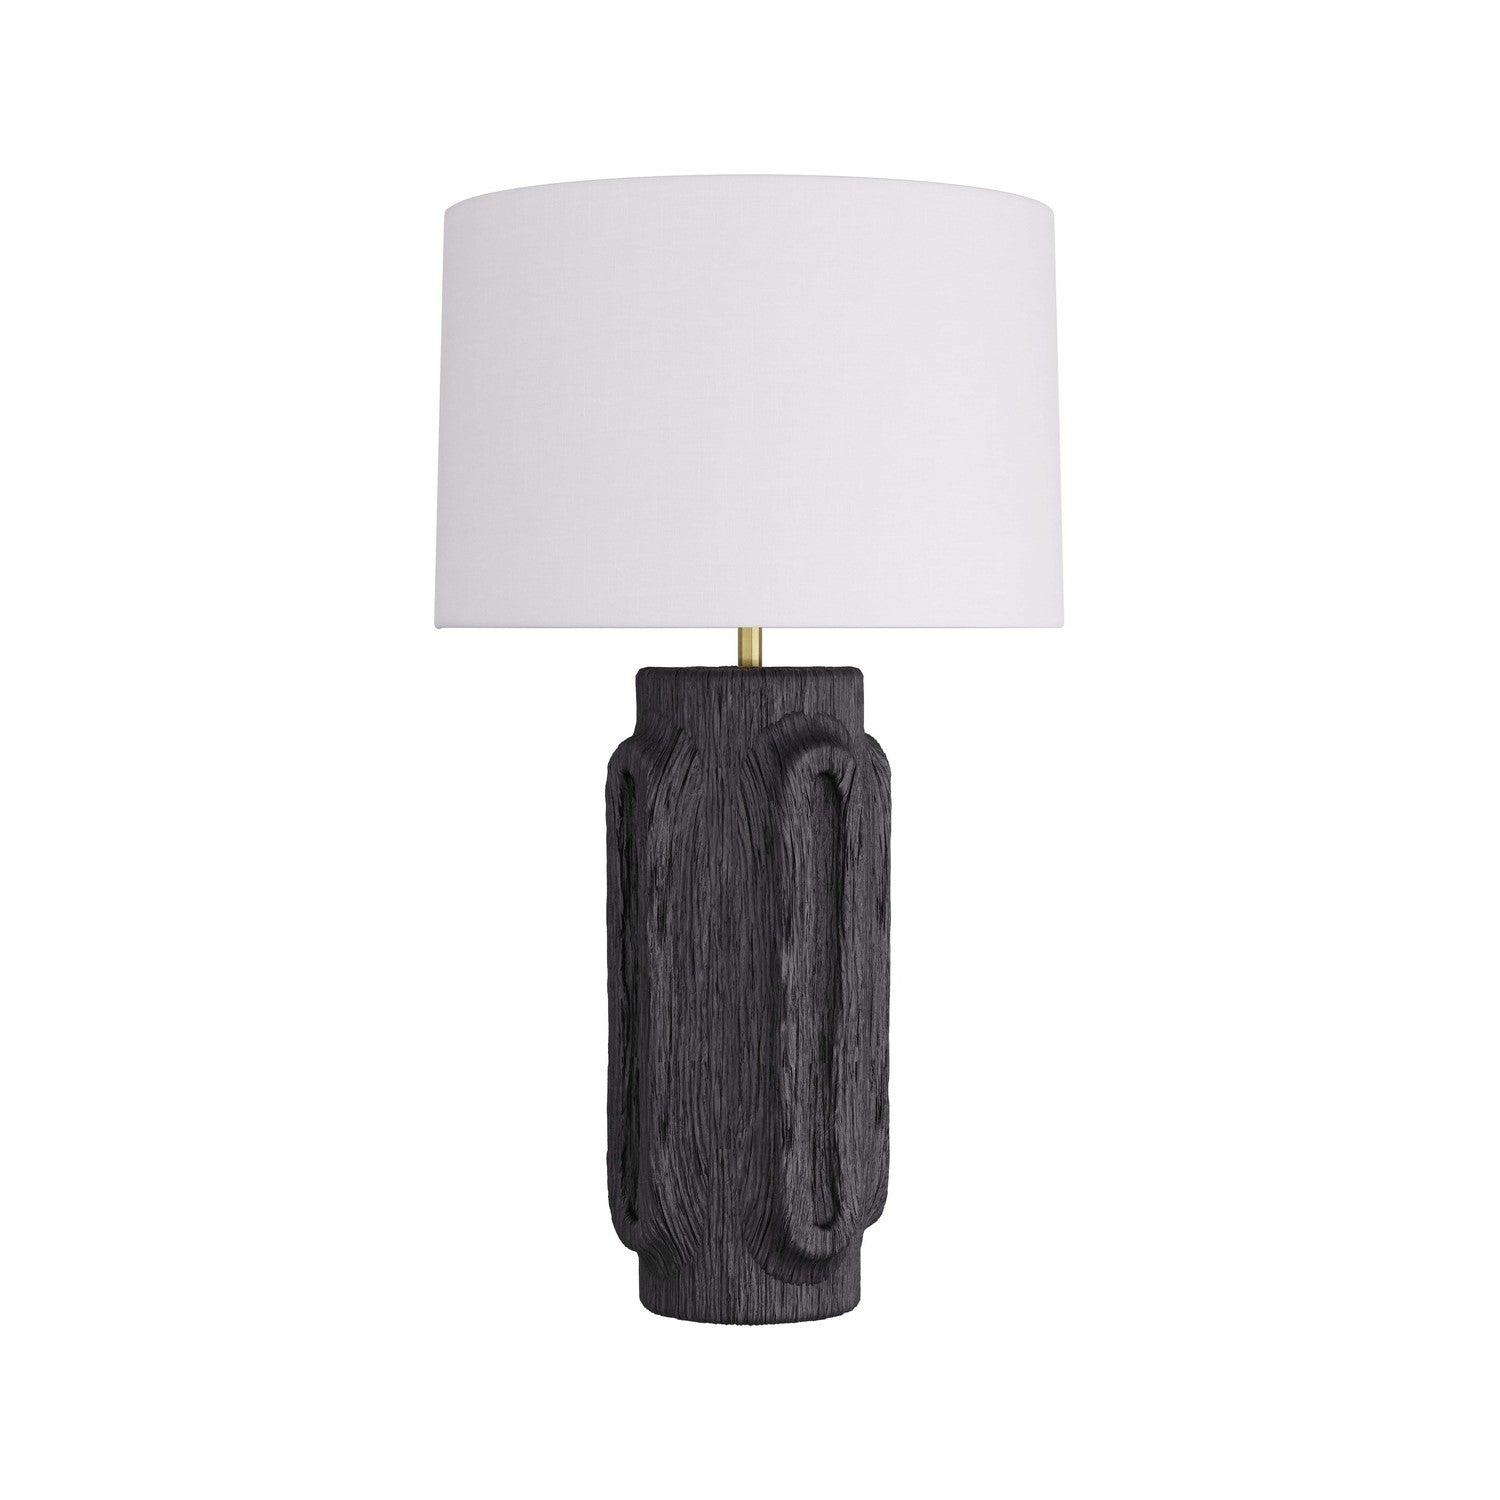 One Light Table Lamp from the Taika collection in Ebony finish